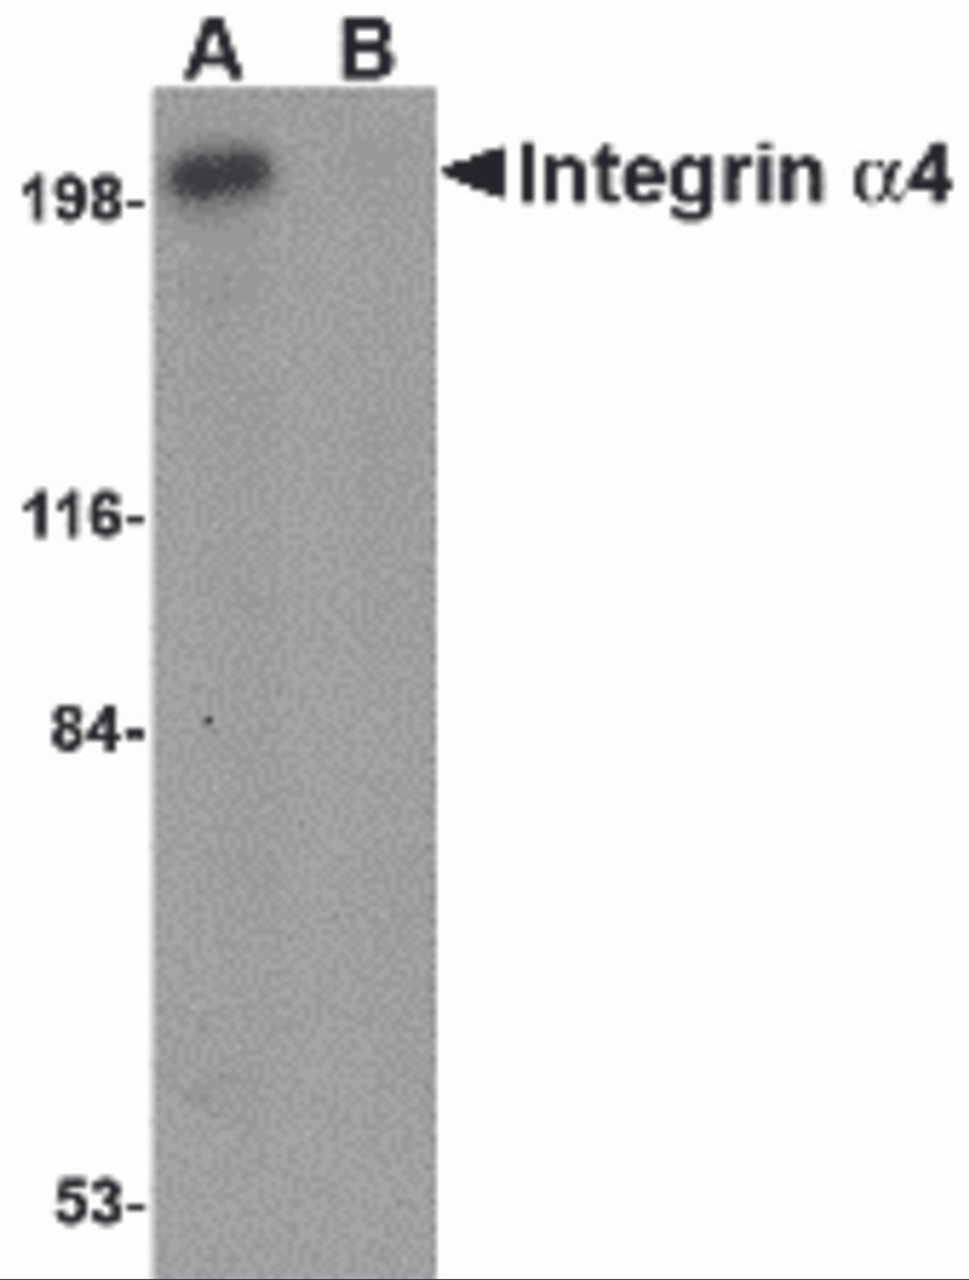 Western blot analysis of Integrin alpha 4 in Jurkat cell lysate with Integrin alpha 4 antibody at 1 &#956;g/mL in (A) the absence and (B) the presence of blocking peptide.